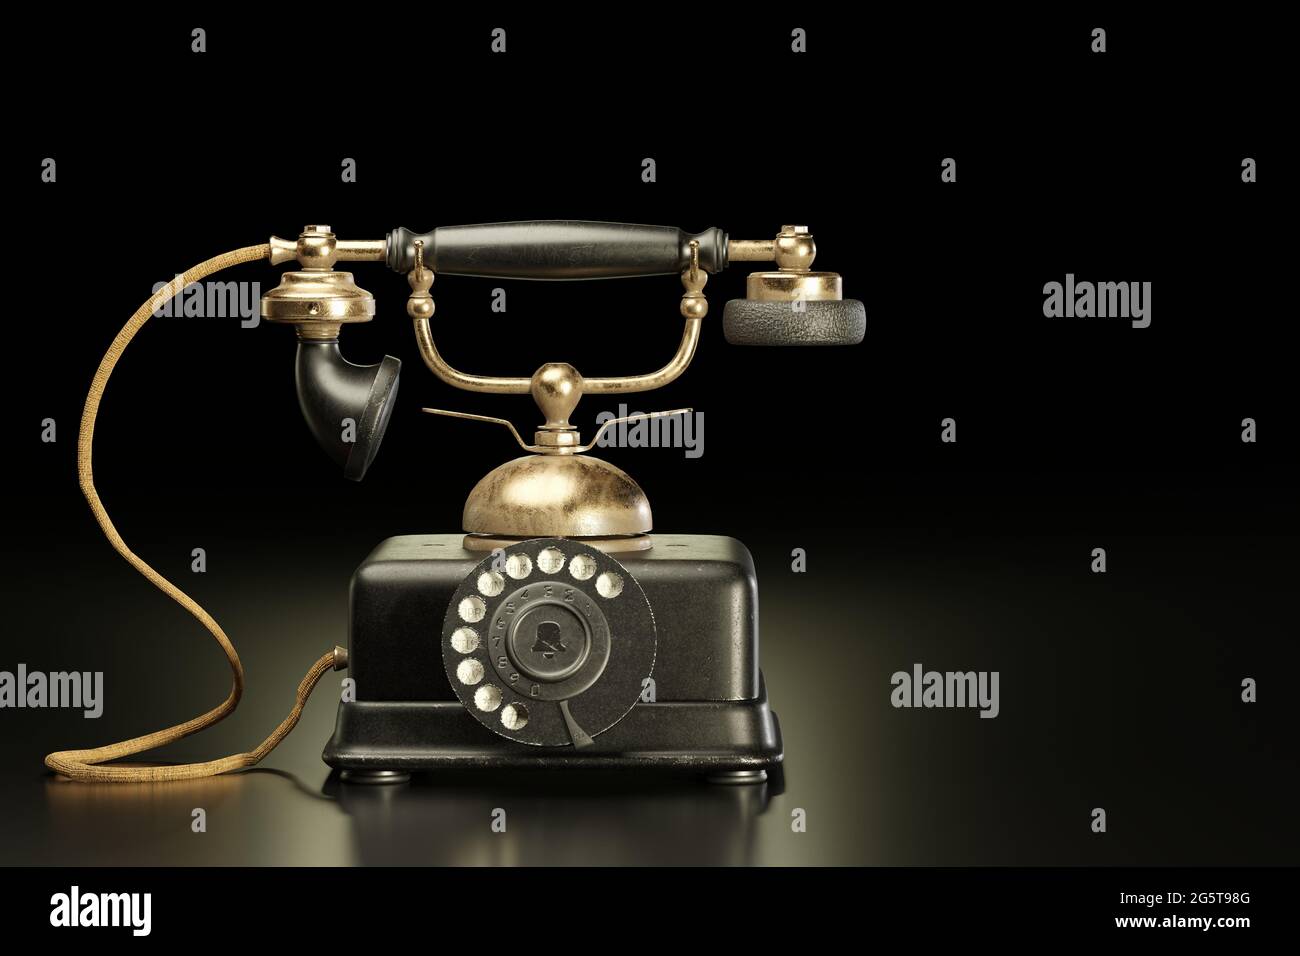 Vintage brass and black iron telephone in dark background. It was a communication antique tool in the past that used a dial to call each other. Copy s Stock Photo